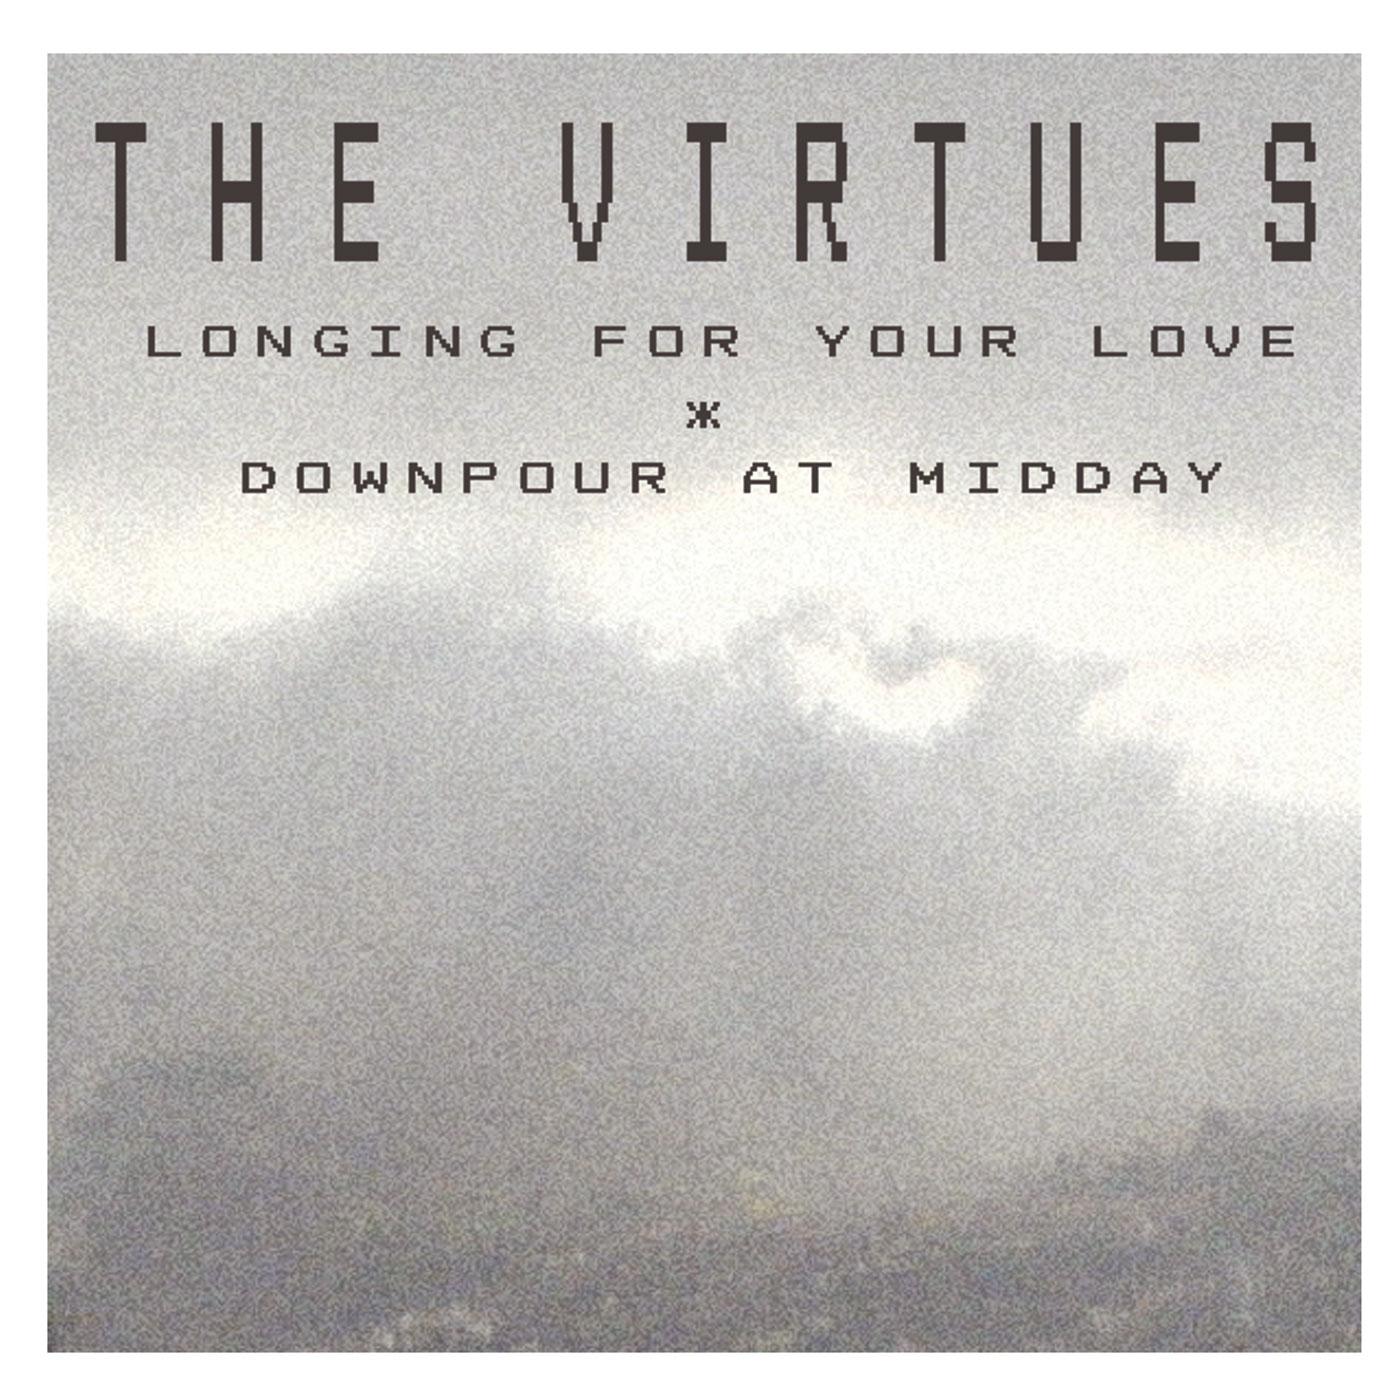 Longing For Your Love/Downpour At Midday EP